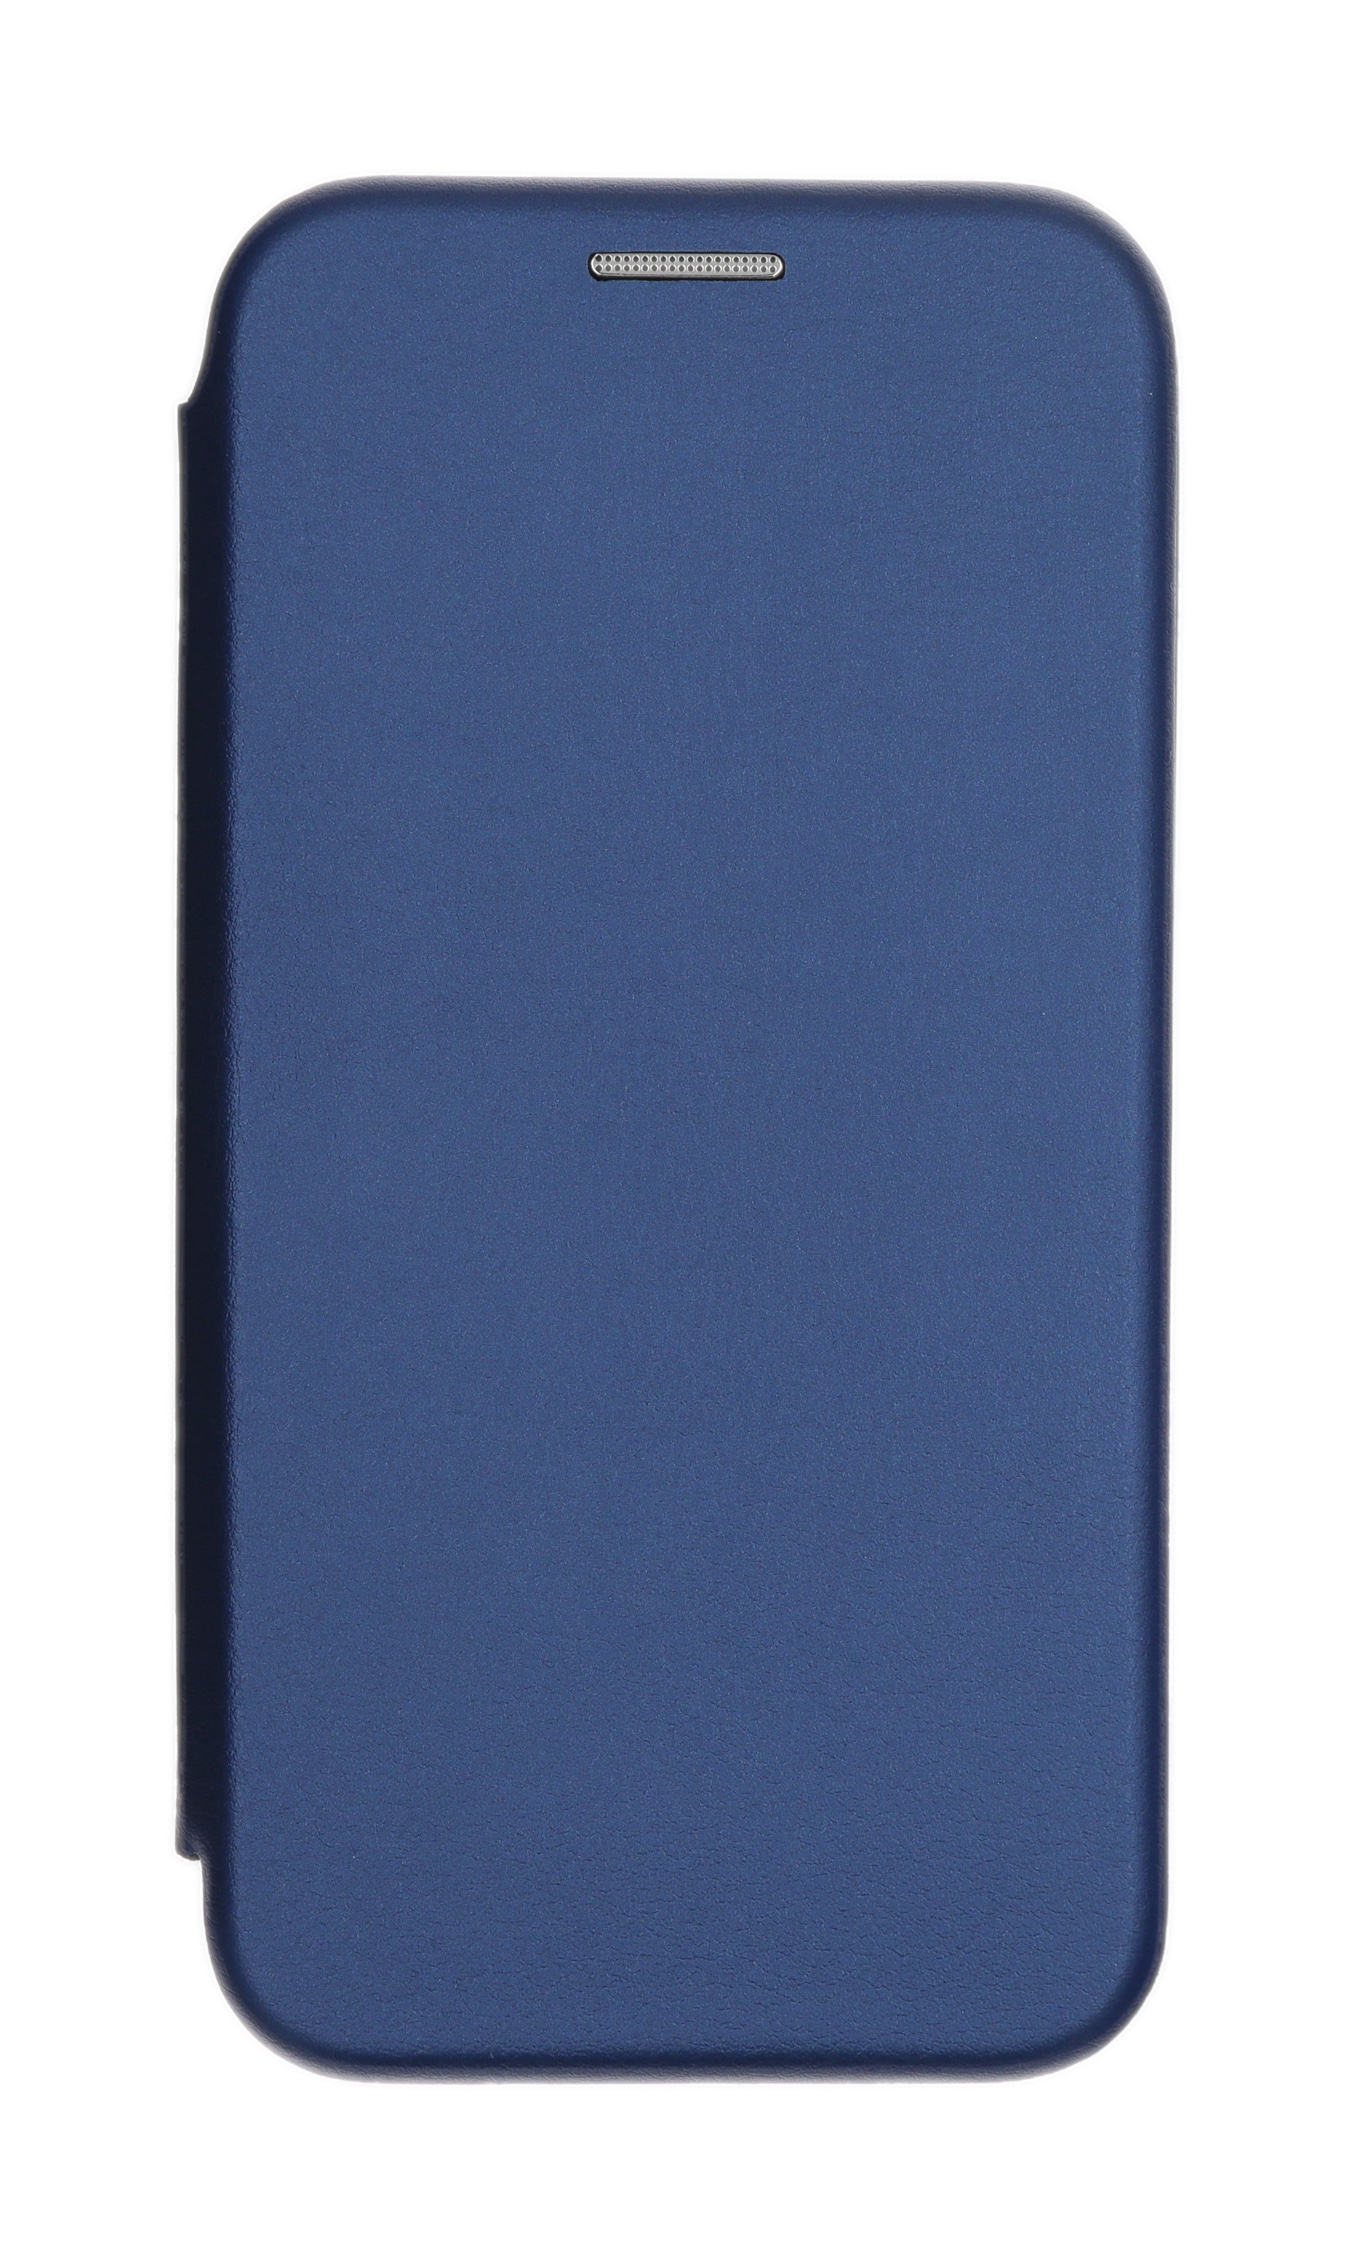 Bookcase A14 5G, Samsung, JAMCOVER Galaxy Marineblau A14, Bookcover, Rounded, Galaxy